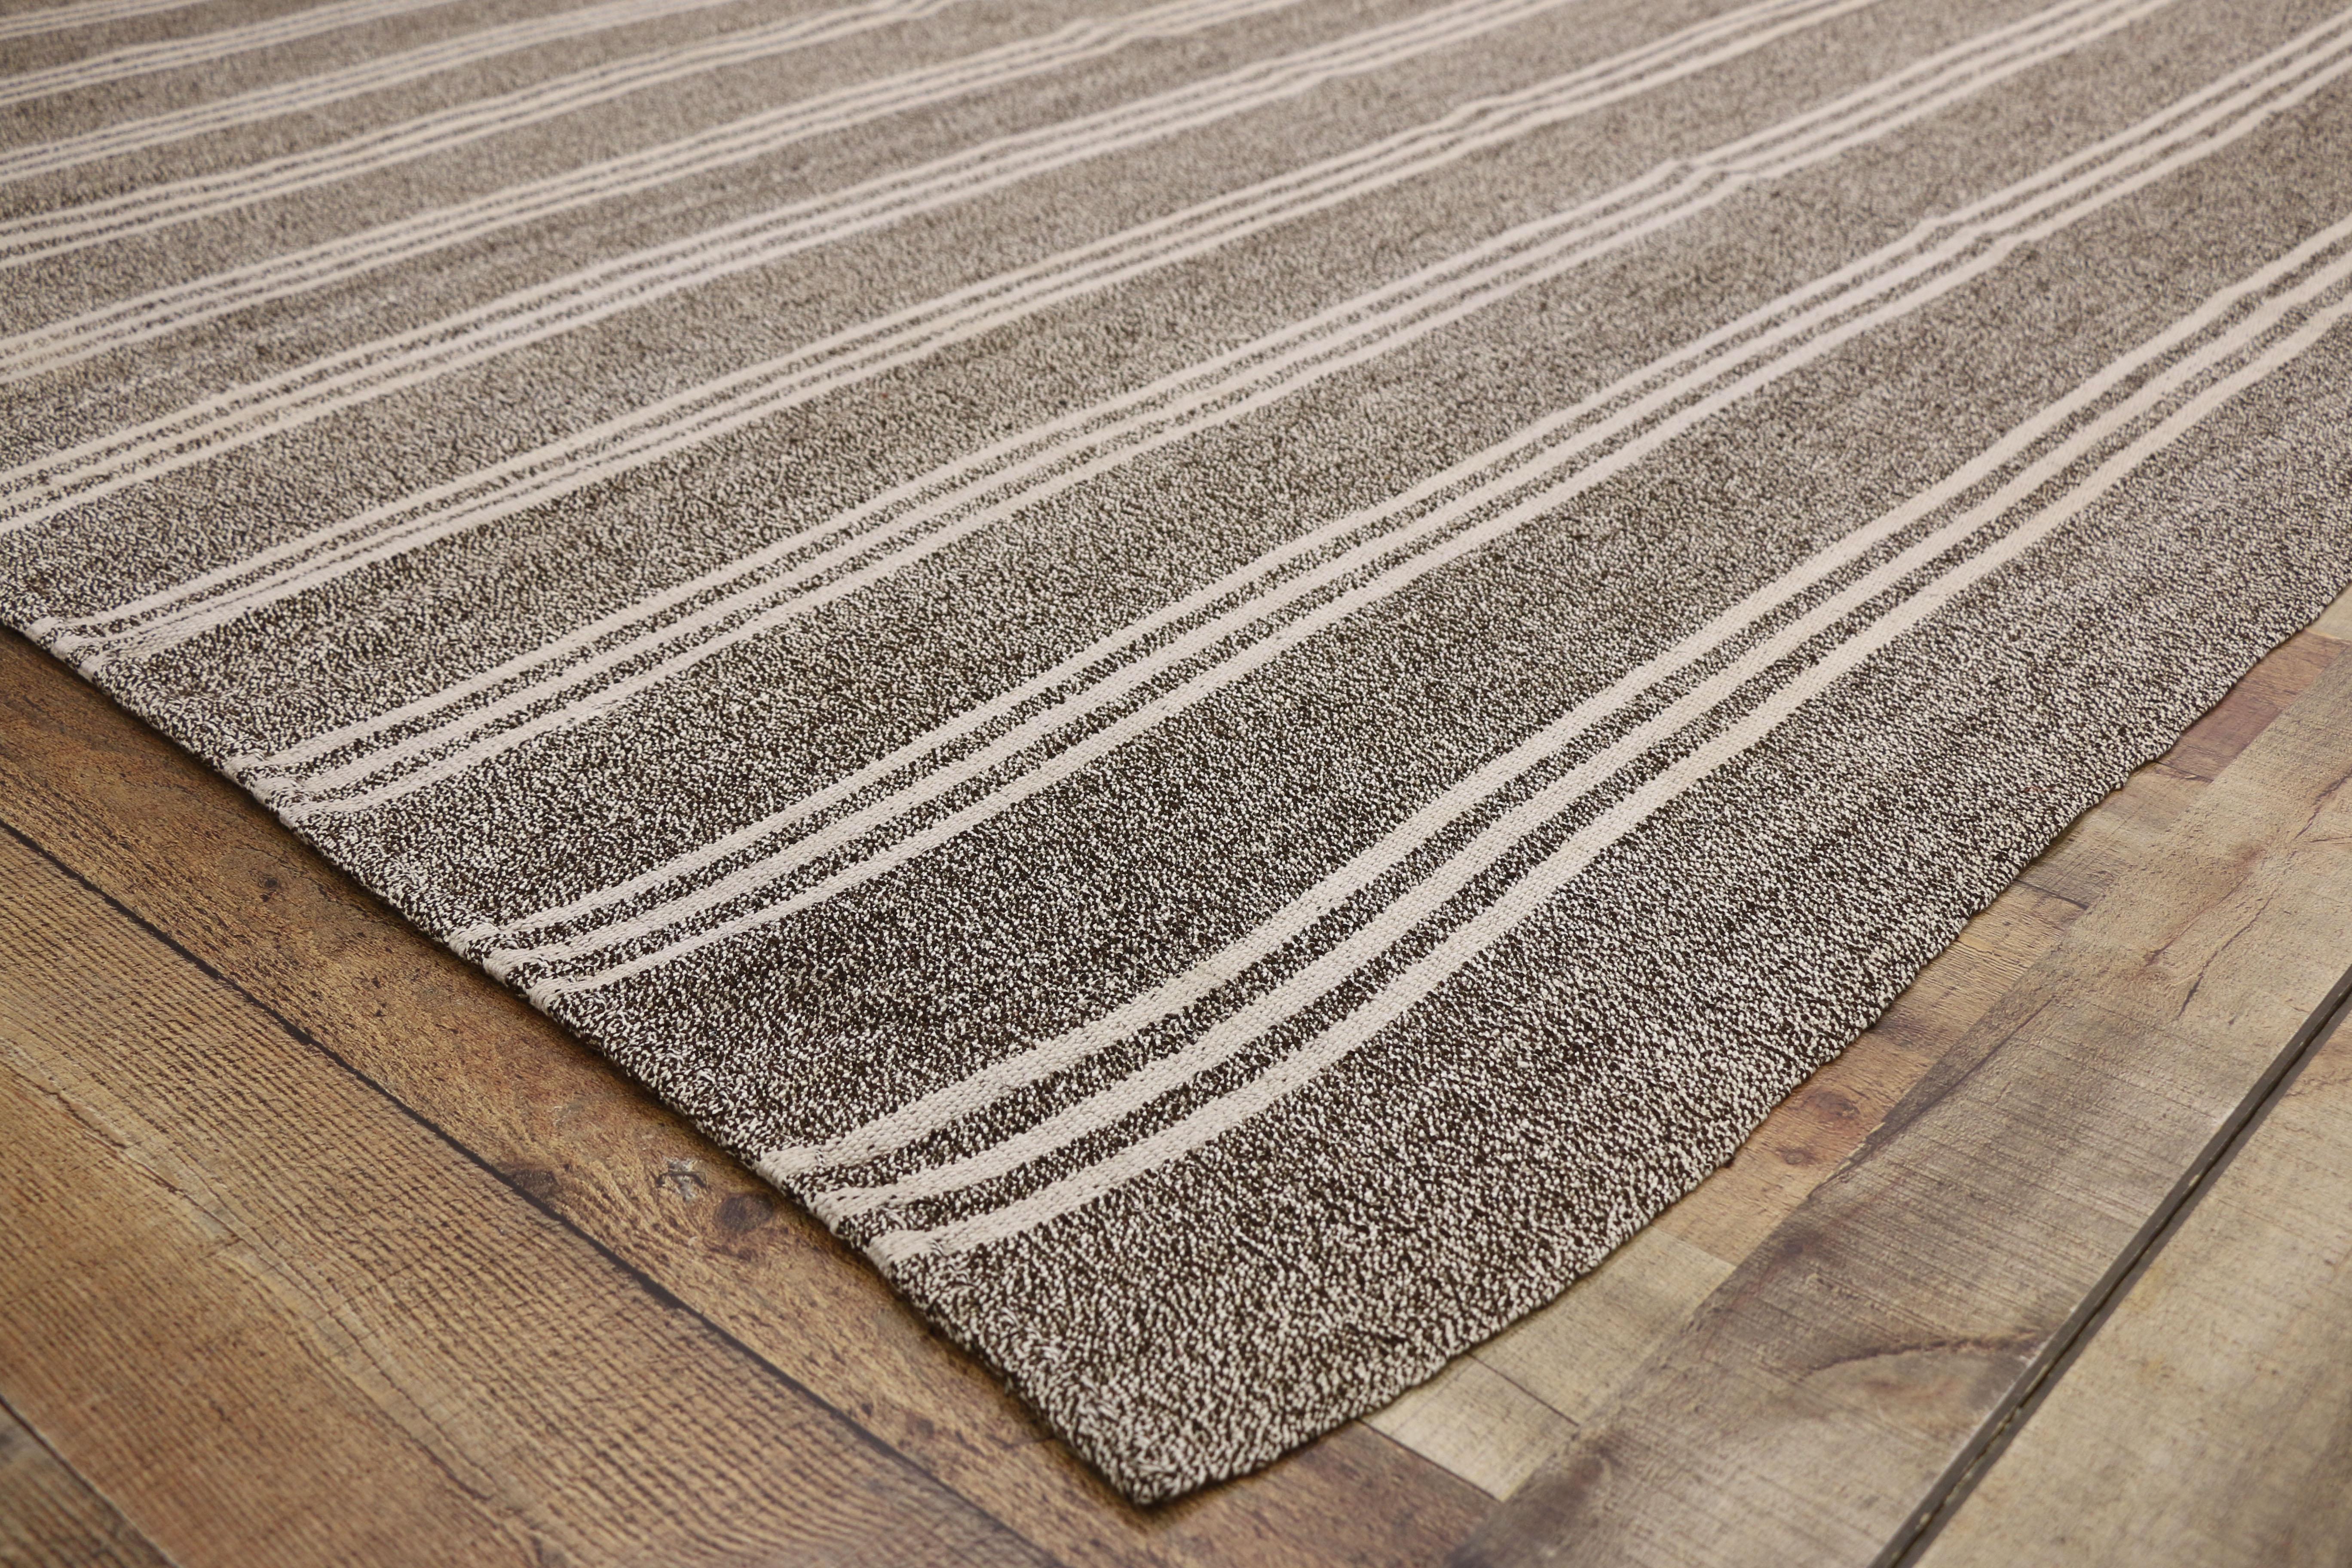 Wool Vintage Turkish Striped Kilim Area Rug with Modern Industrial Style For Sale